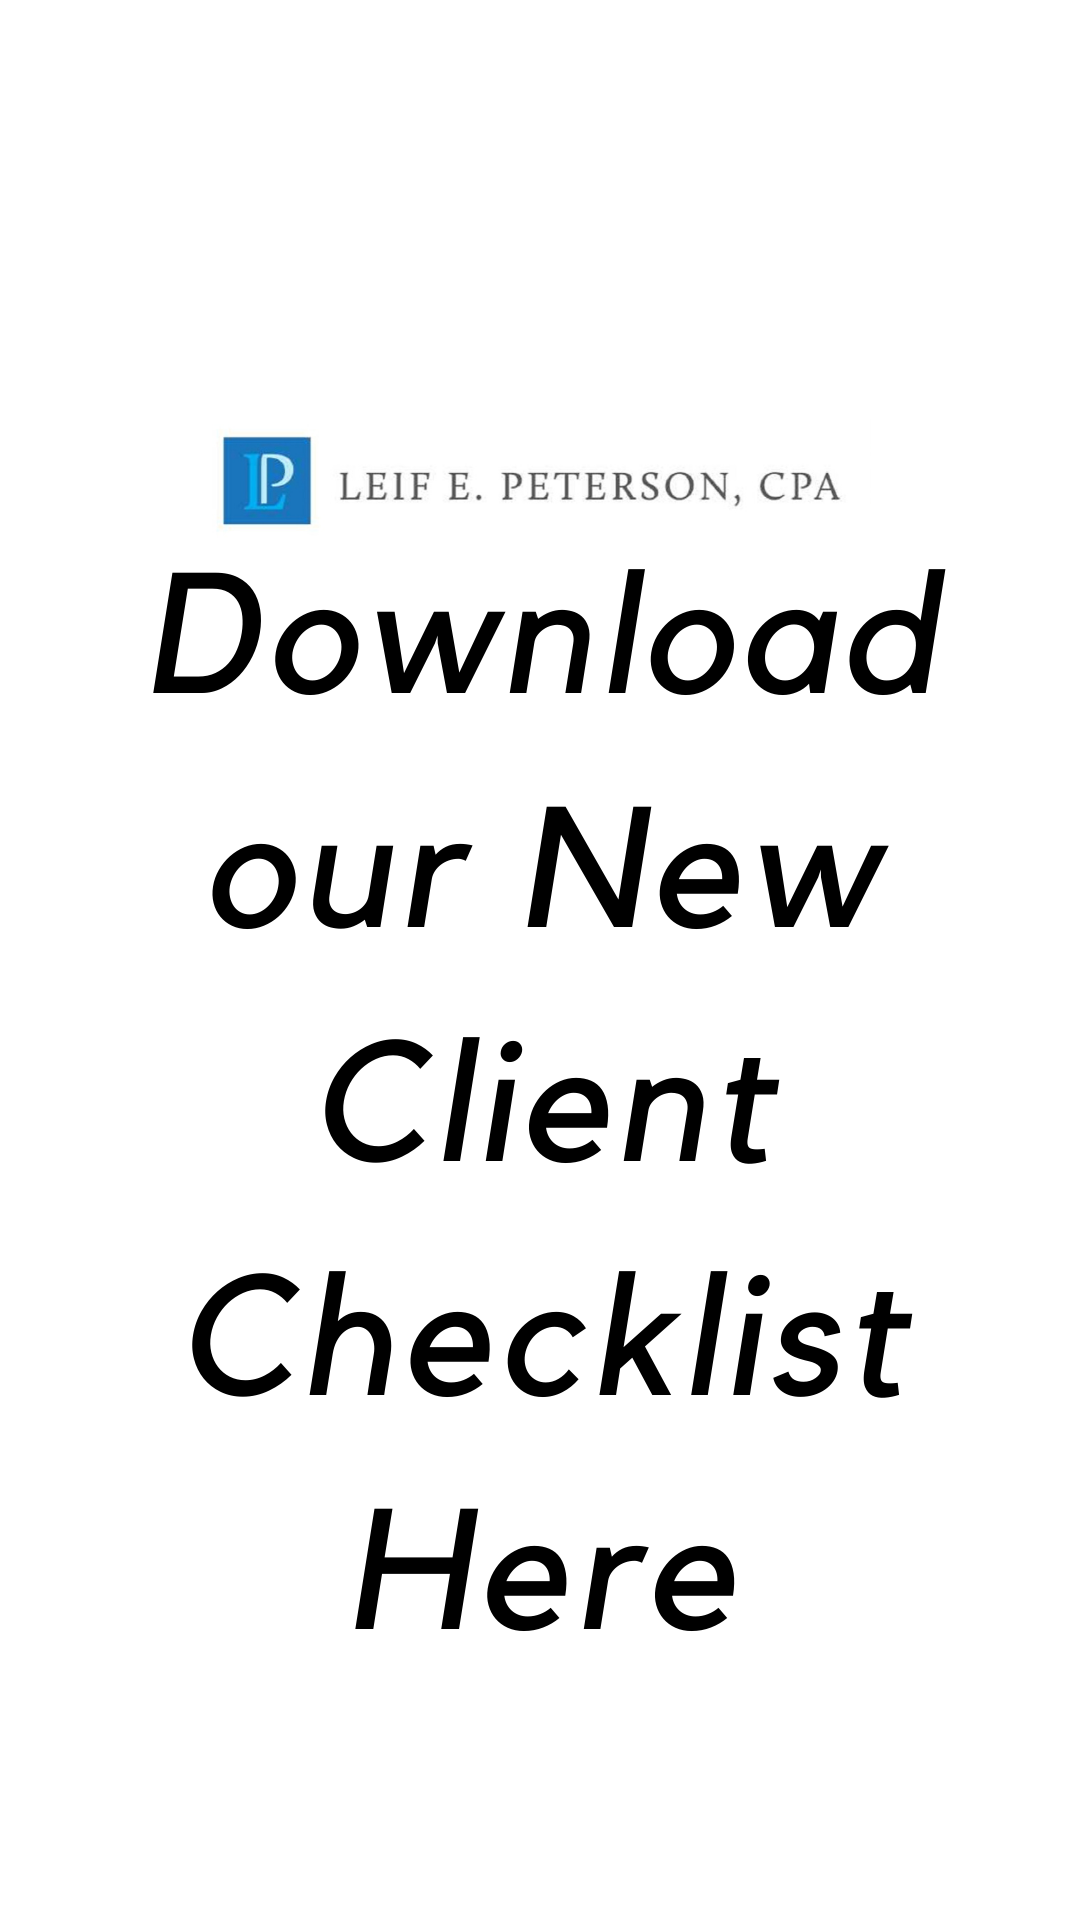 Download our New Client Checklist Here